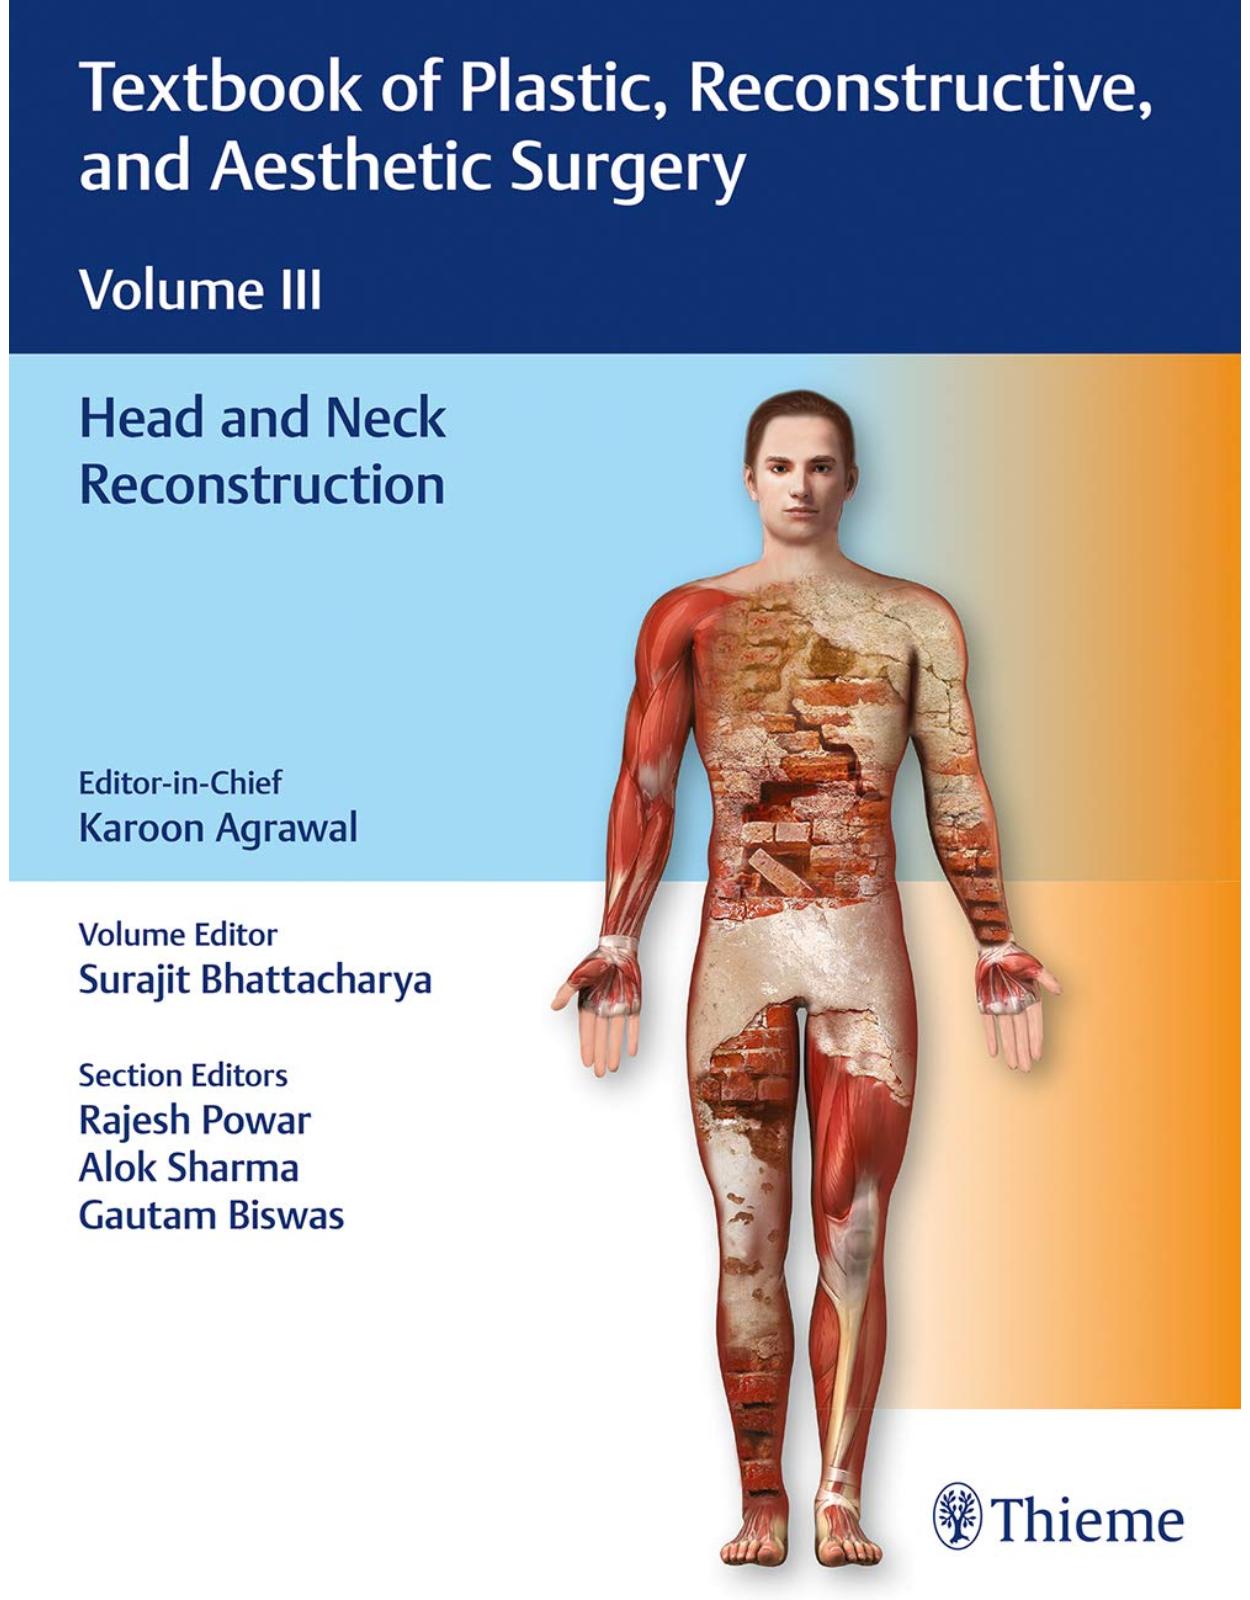 Textbook of Plastic, Reconstructive, and Aesthetic Surgery (Vol. 3): Head and Neck Reconstruction